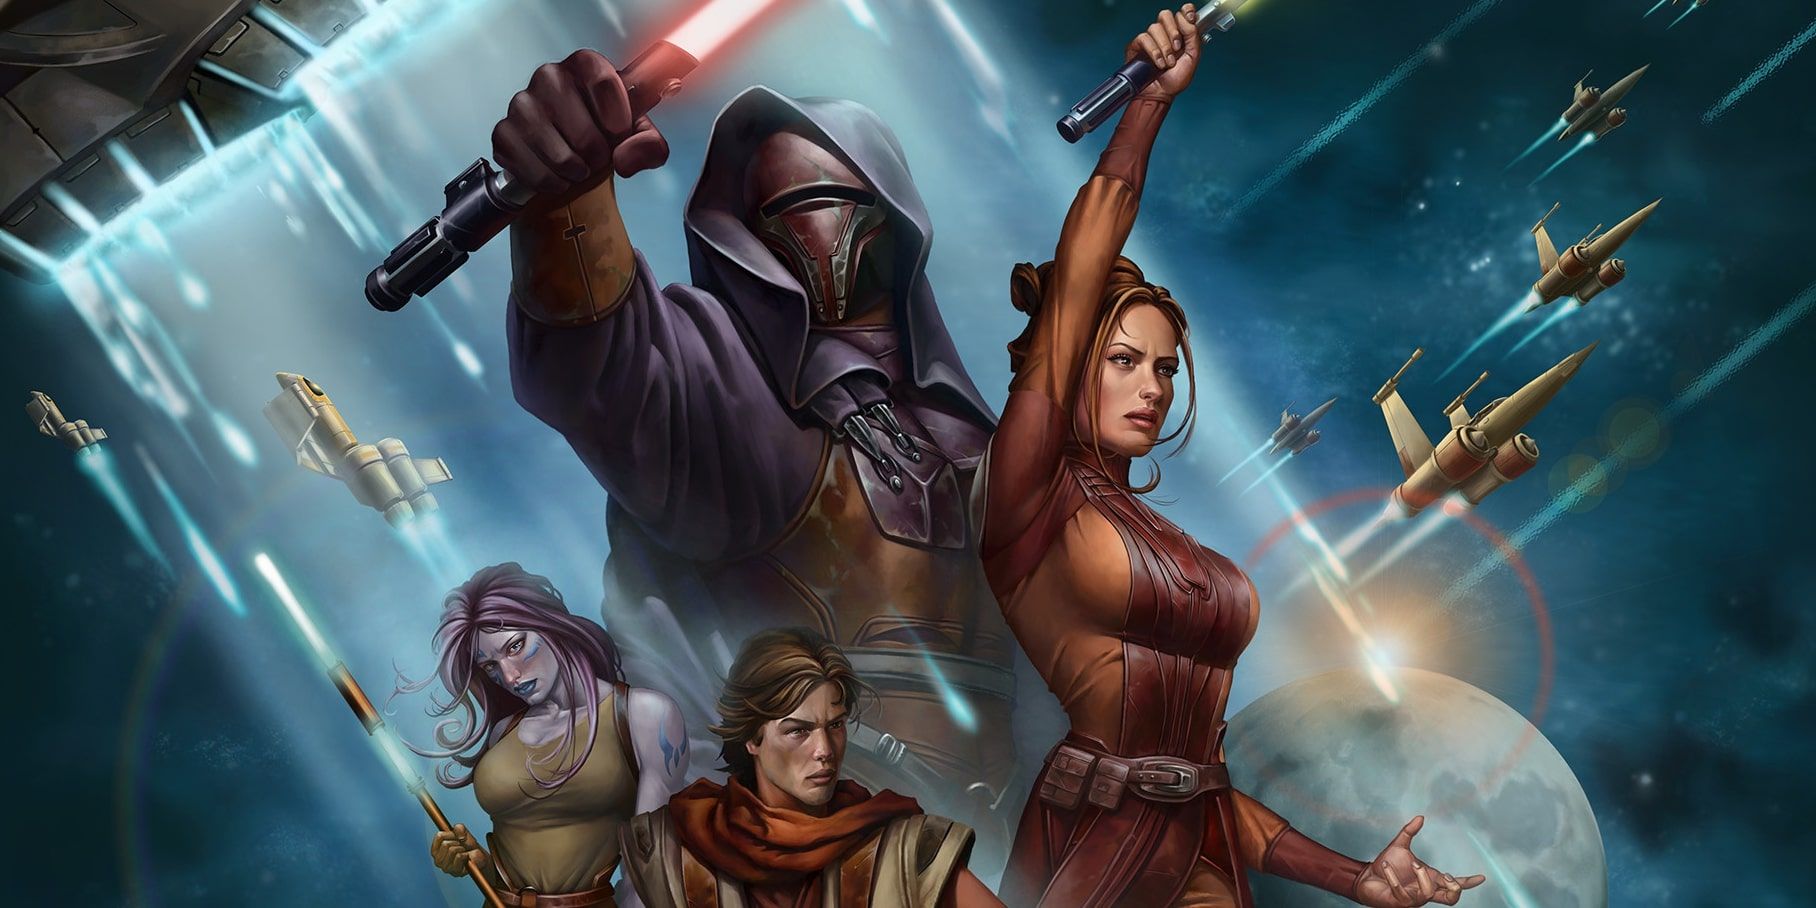 poster for Star Wars Knights of the Old Republic featuring Revan and Bastila Shan with lightsabers